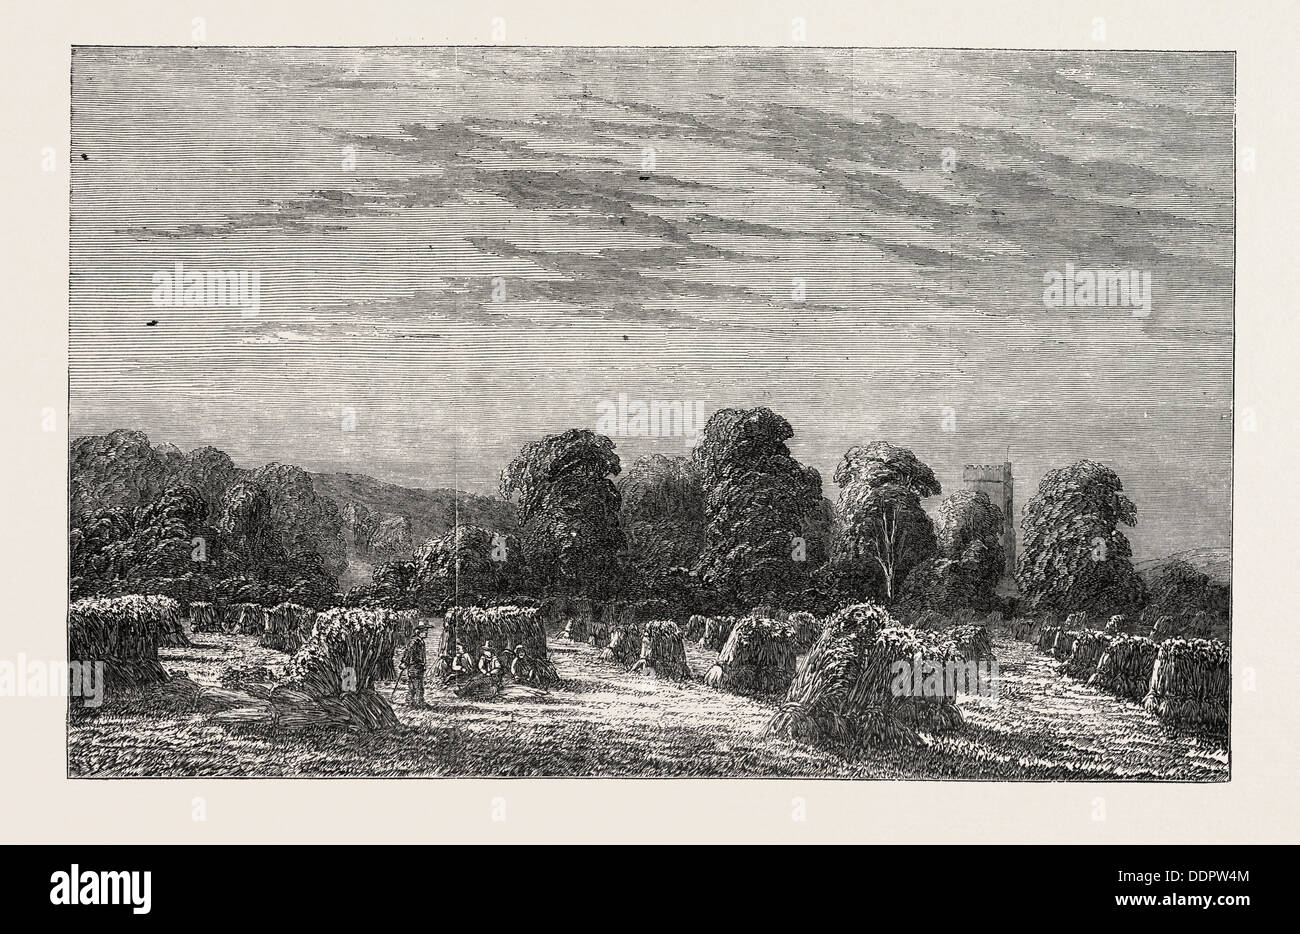 EXHIBITION OF MODERN BRITISH ART: A CORN FIELD: EVENING. PAINTED BY C. DAVIDSON, 1851 engraving Stock Photo